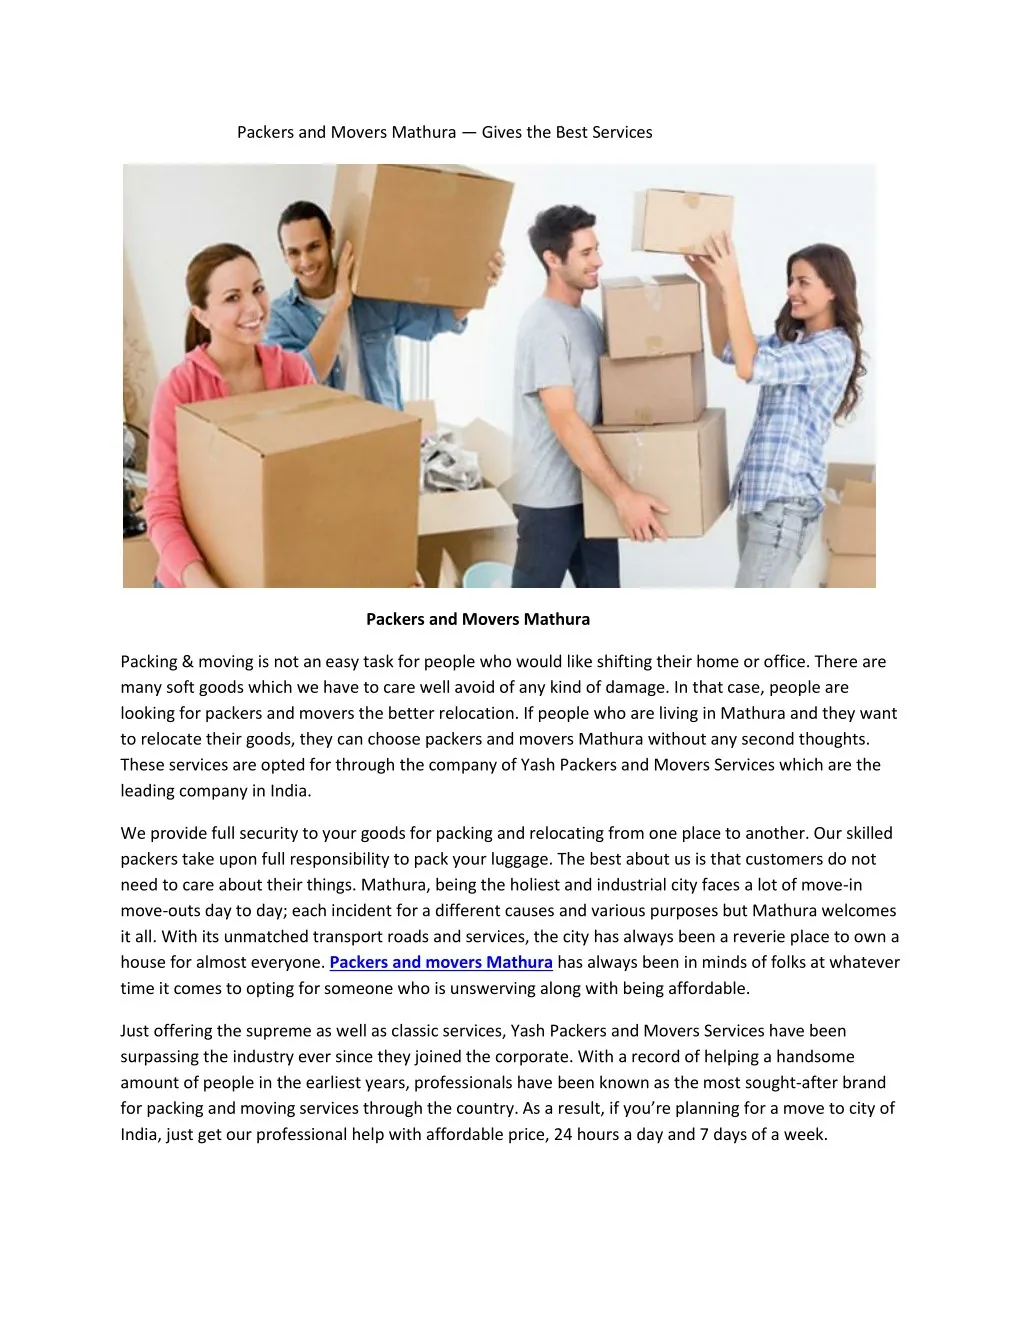 packers and movers mathura gives the best services